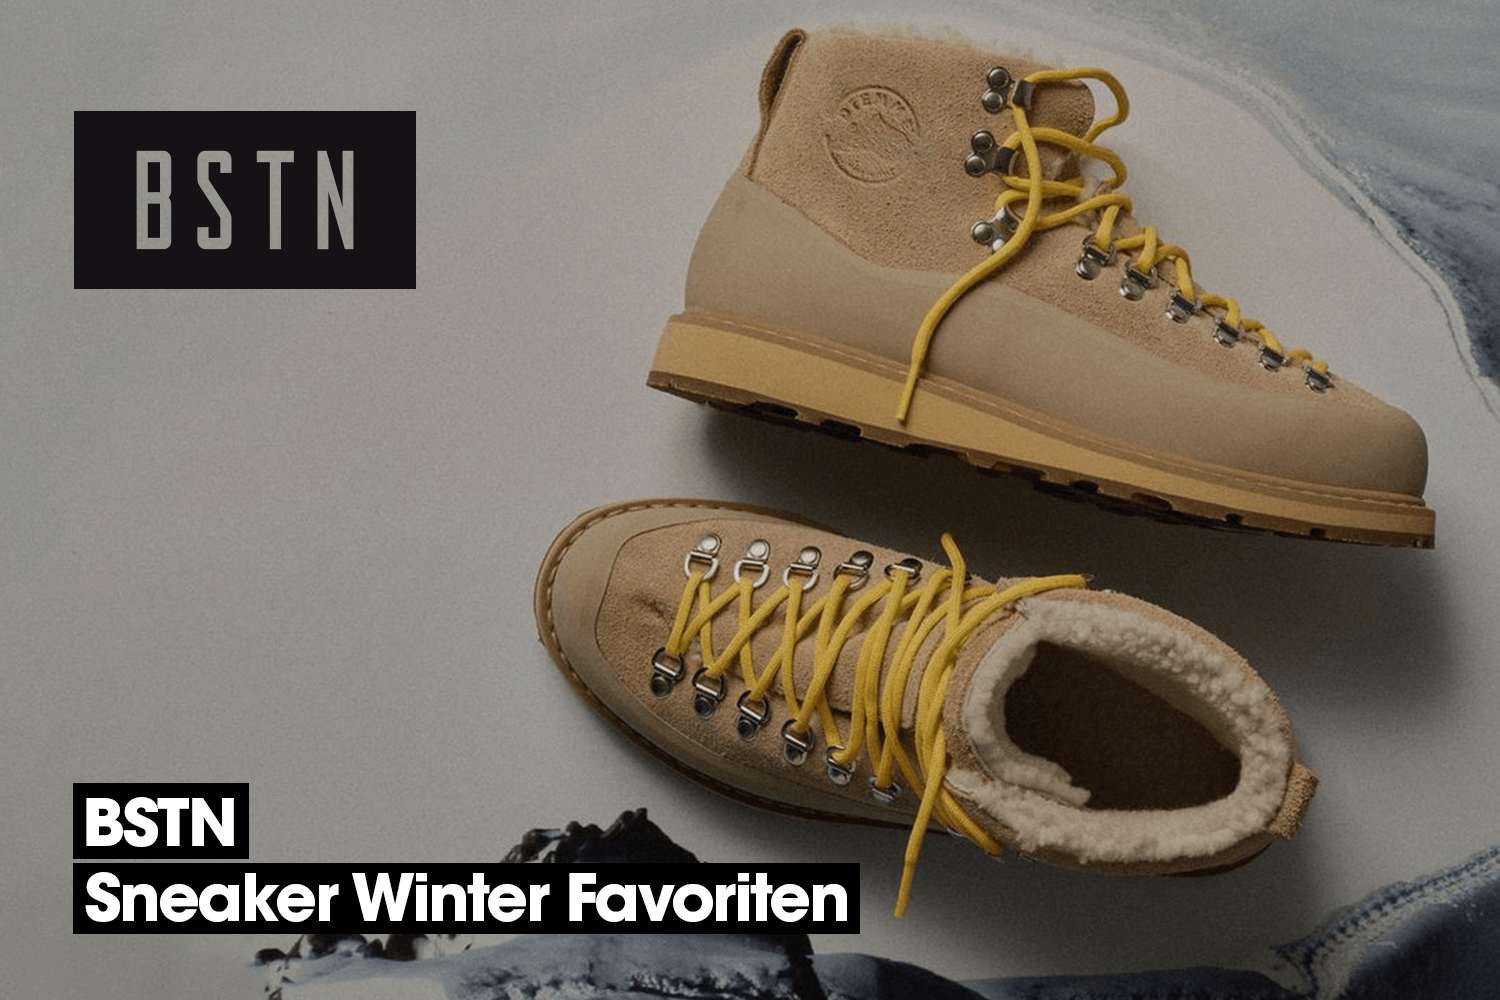 Sneakers, boots and more shoes for winter at BSTN